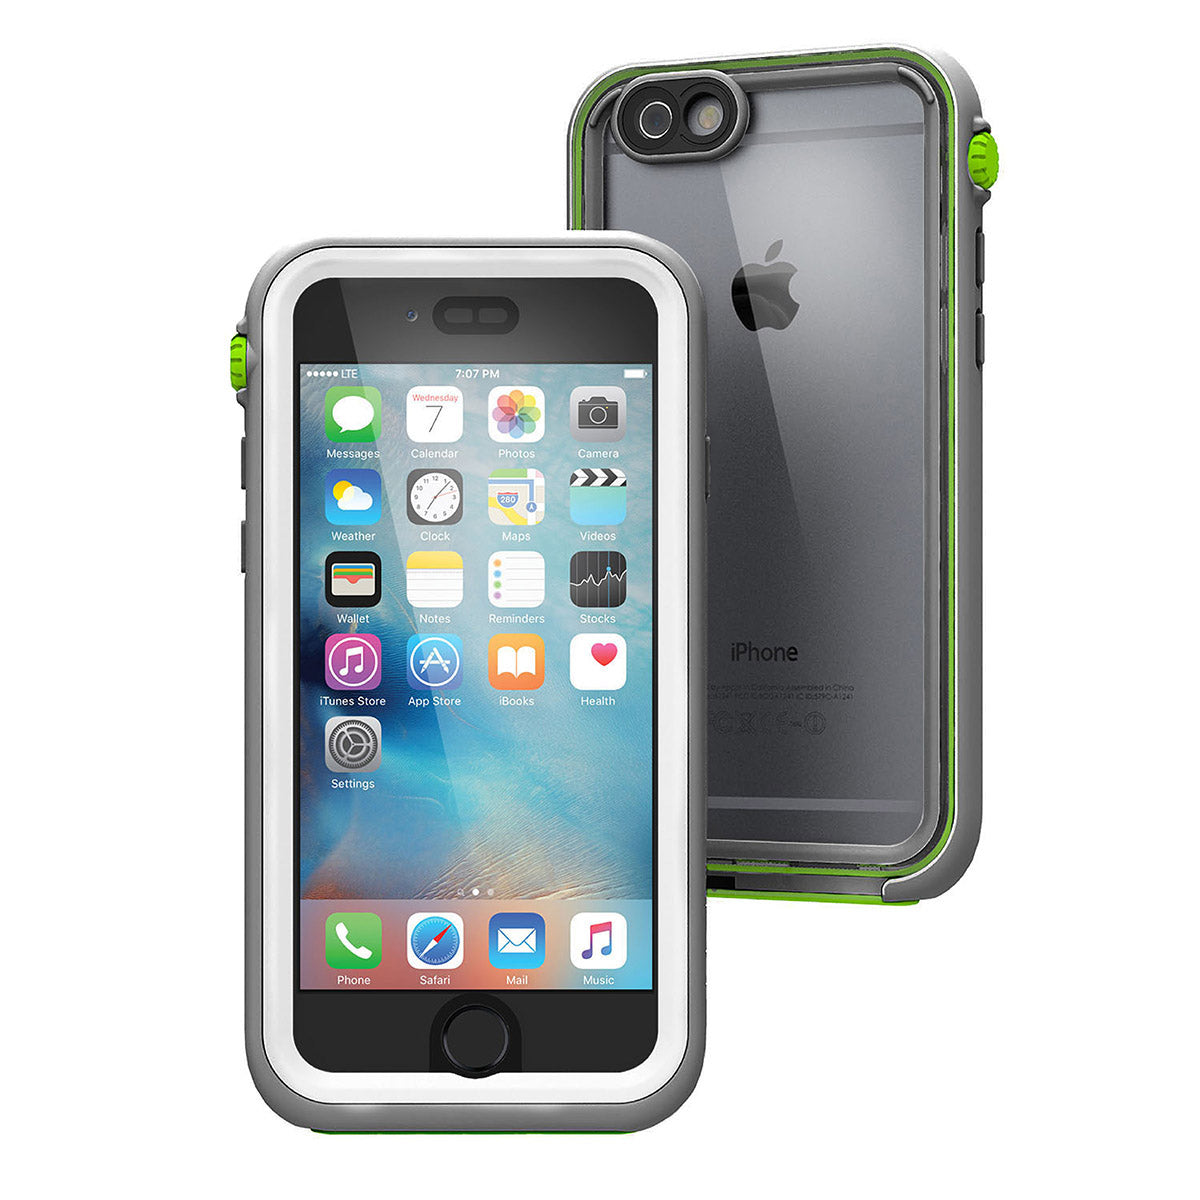 Catalyst iphone 6s waterproof case showing front and back view of the case in green pop colorway